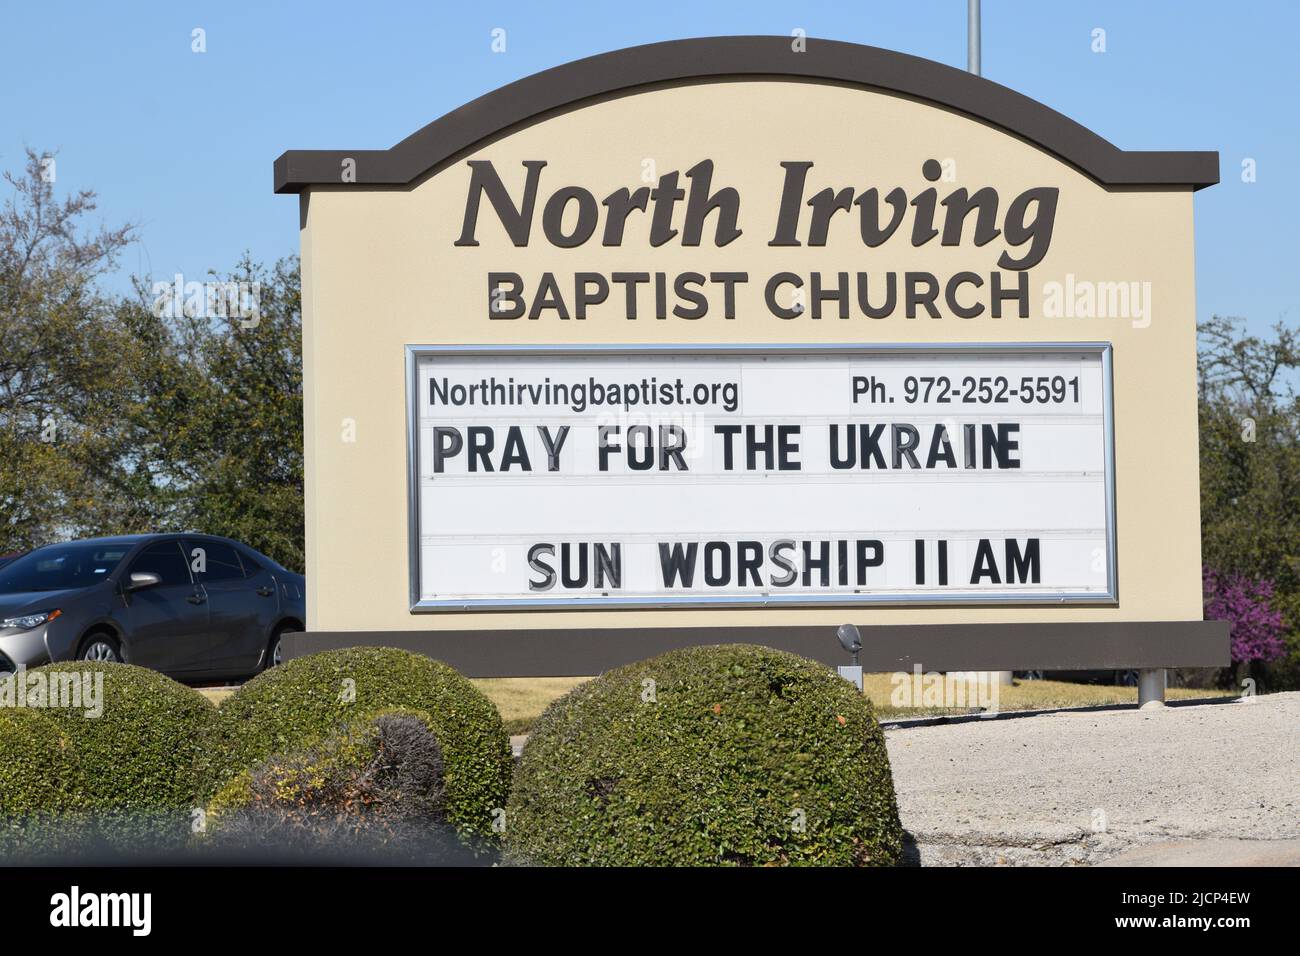 Pray for the Ukraine message on the North Irving Baptist Church sign Stock Photo